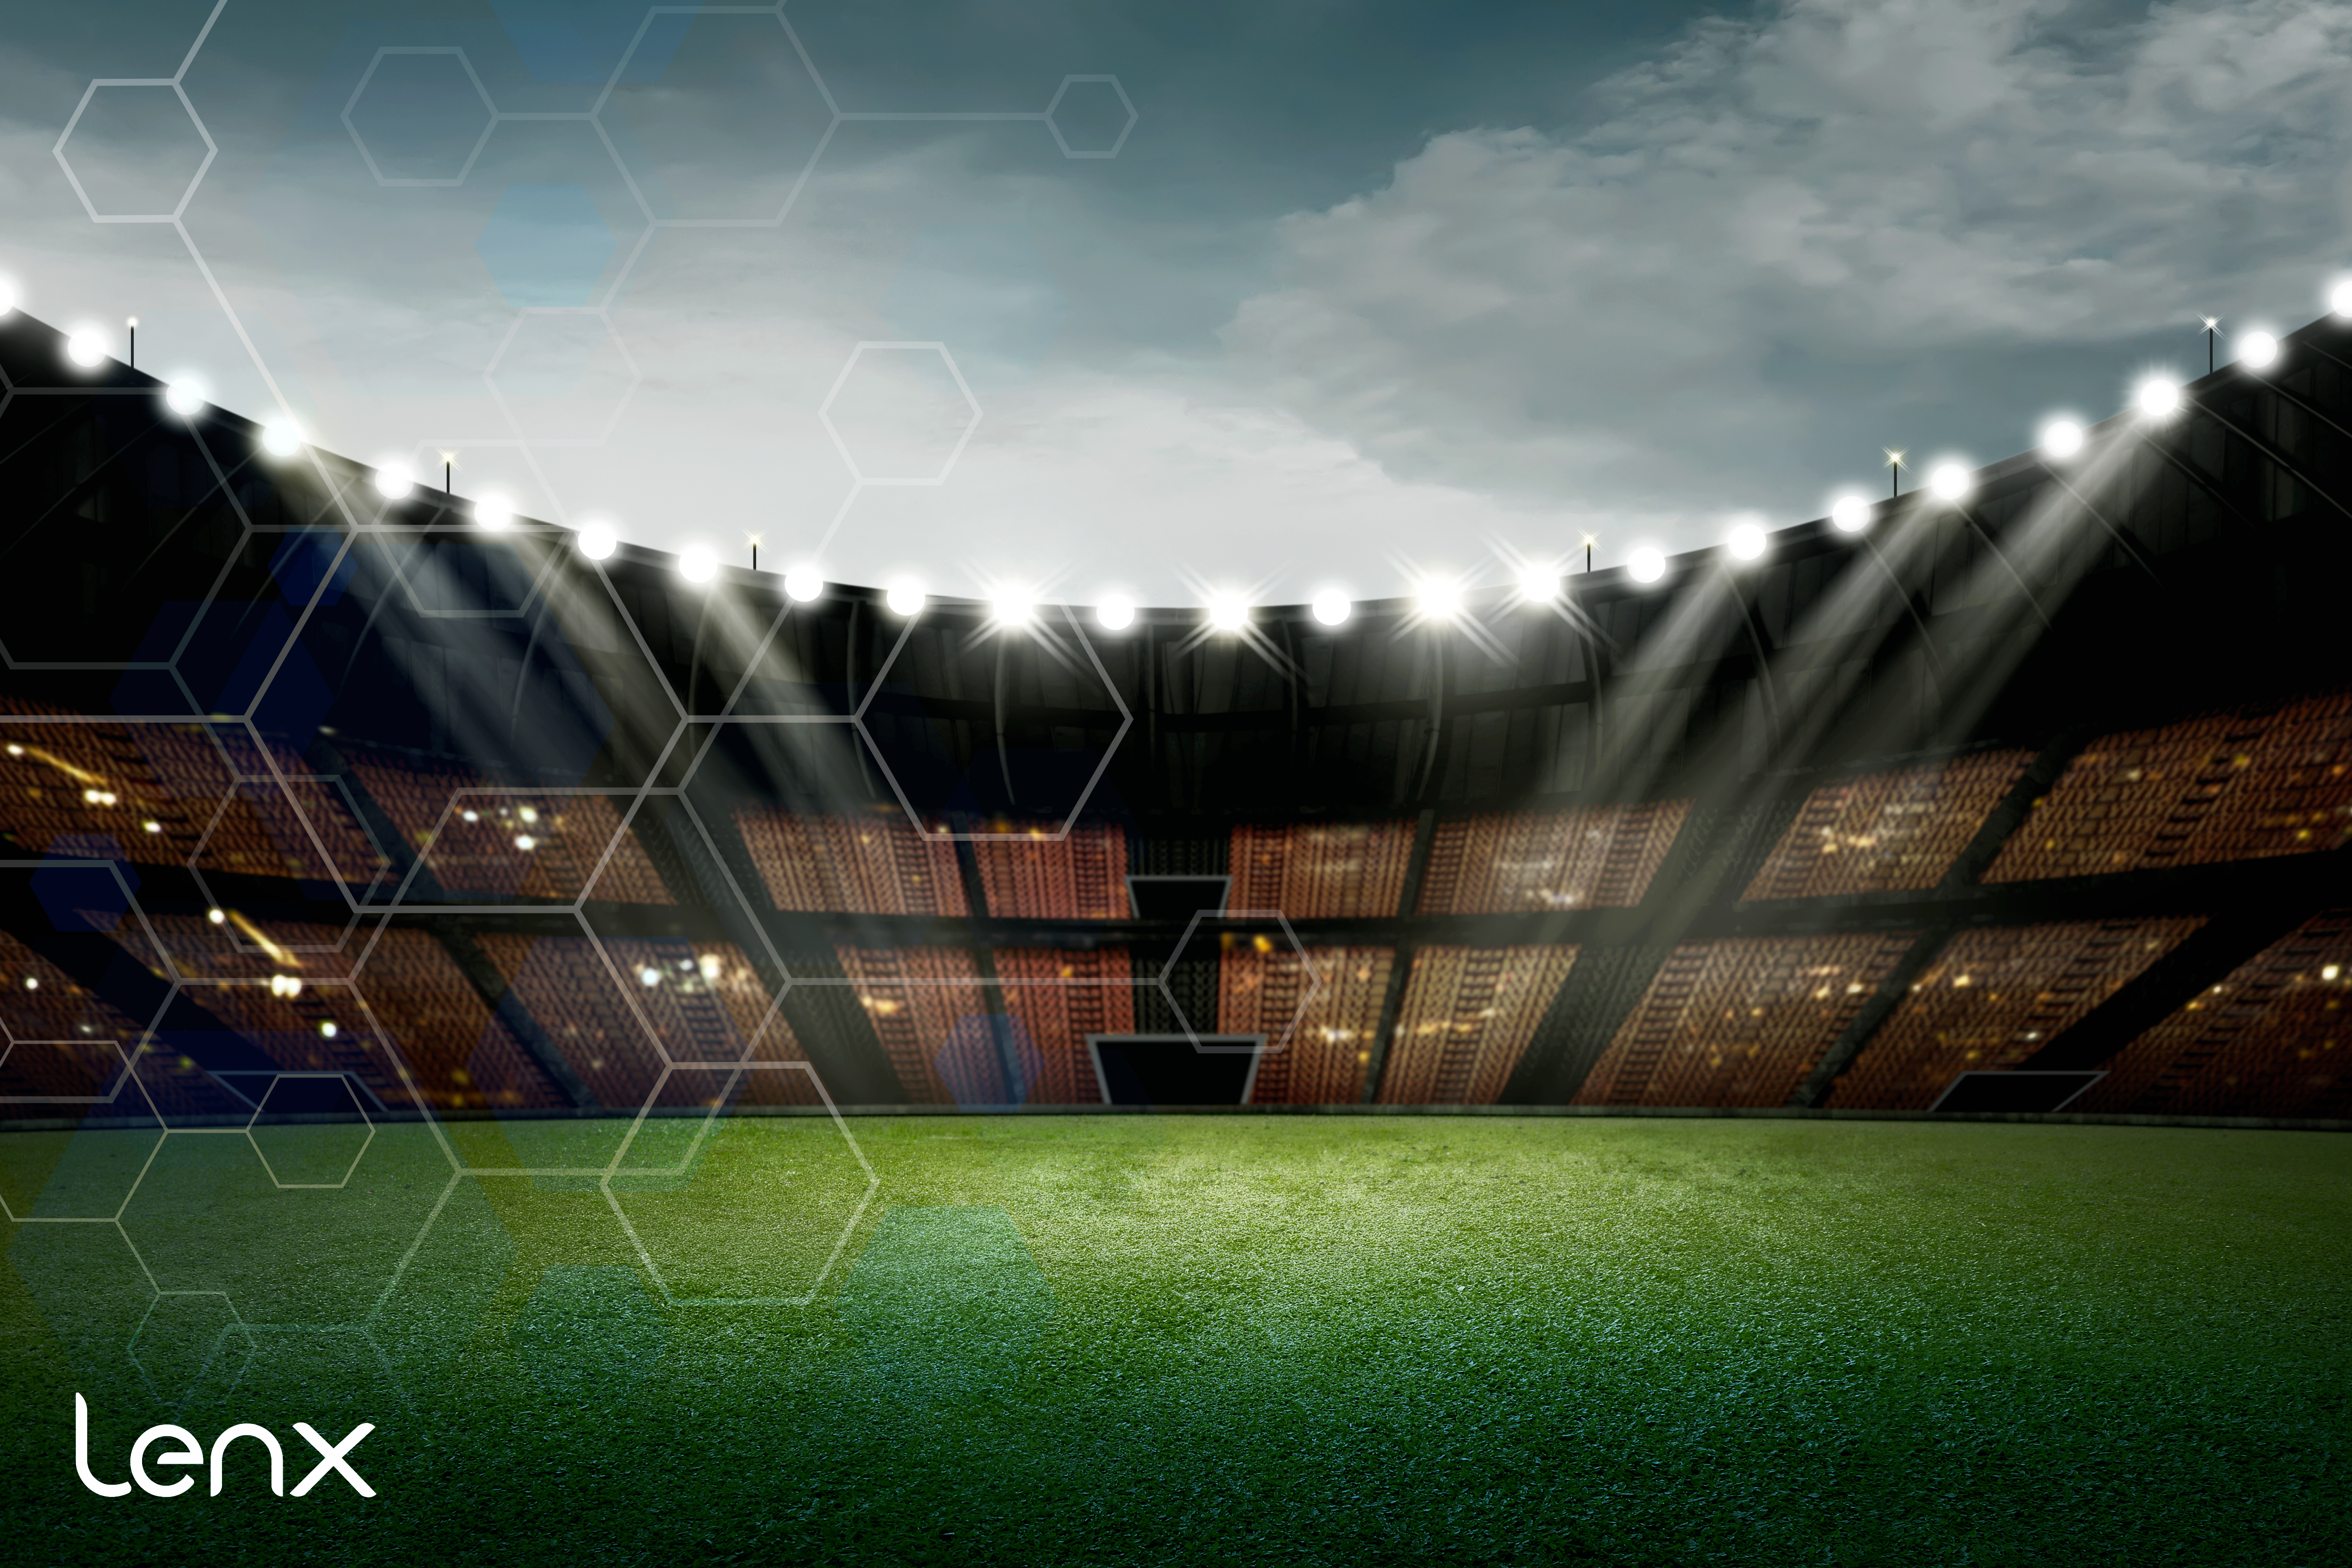 Keeping Stadiums and Sports Venues Safe with AI Security and Gun Detection